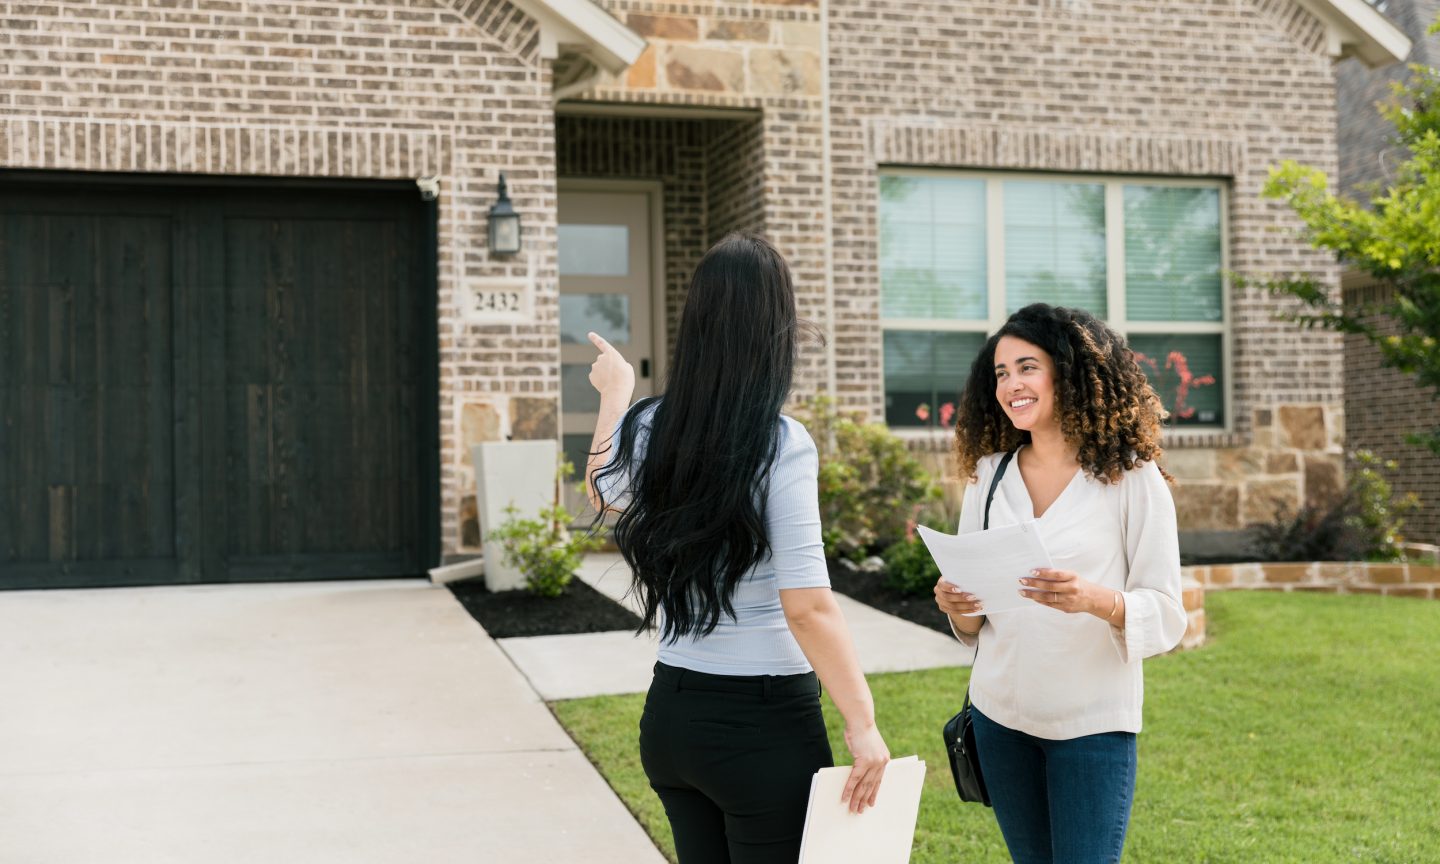 Pupil Mortgage Reduction May Inch You Nearer to Homeownership – NerdWallet